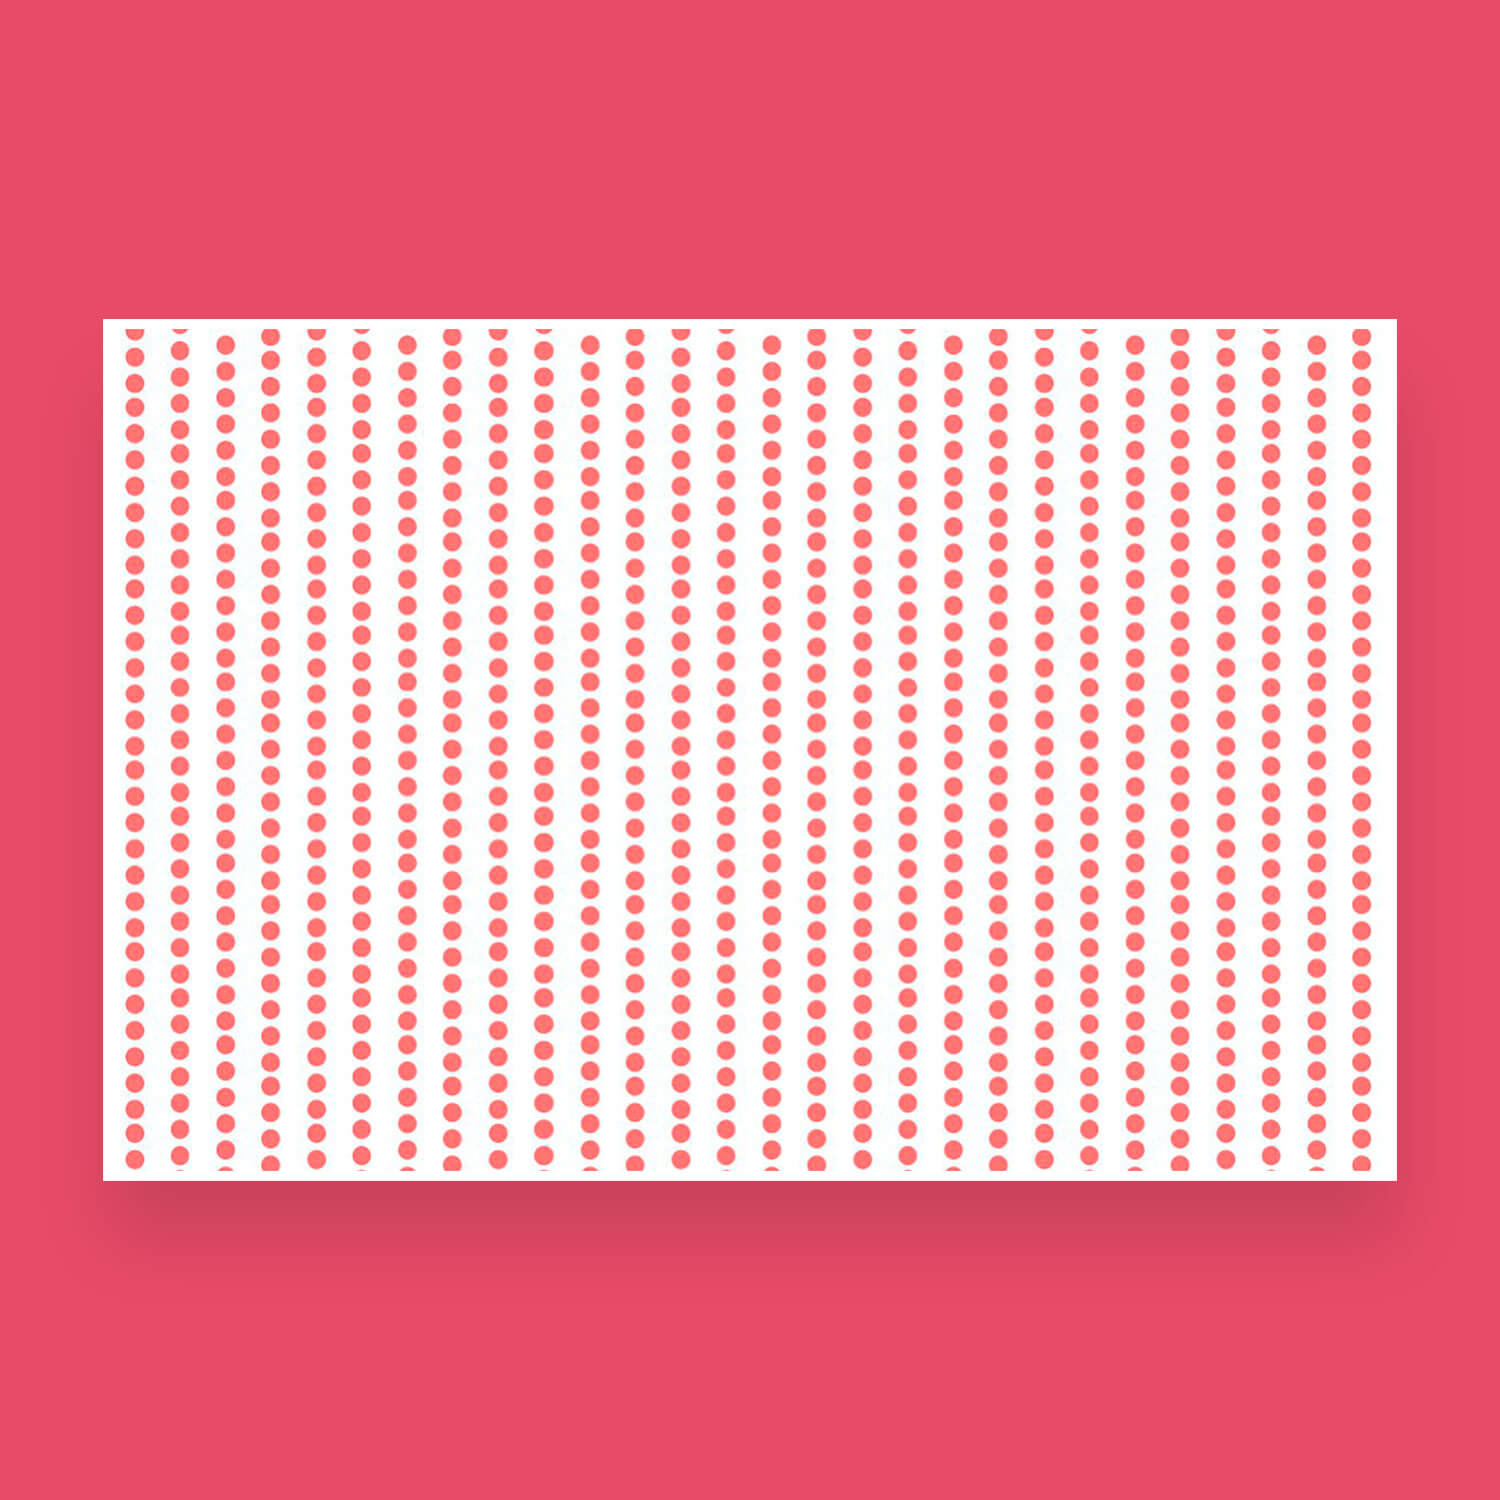 Dotted seamless pattern in the form of pink fat dots.